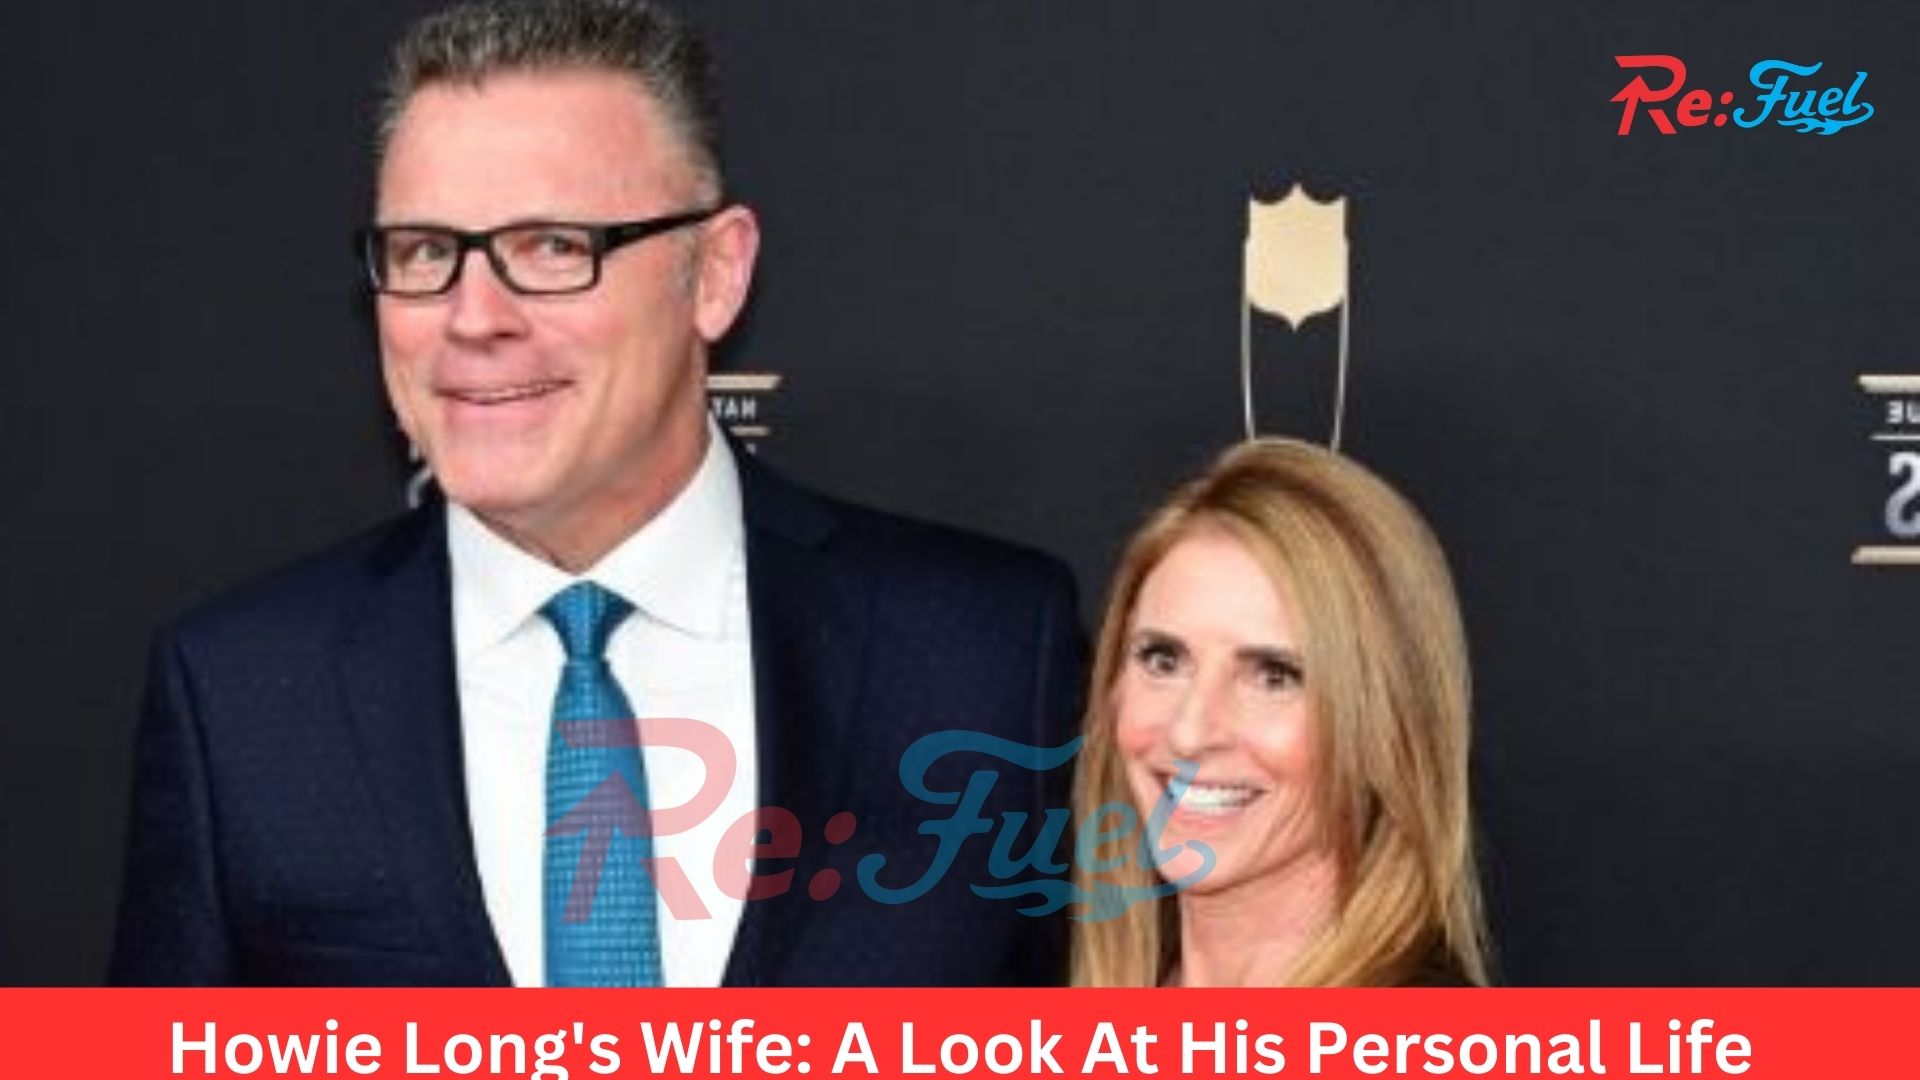 Howie Long's Wife: A Look At His Personal Life